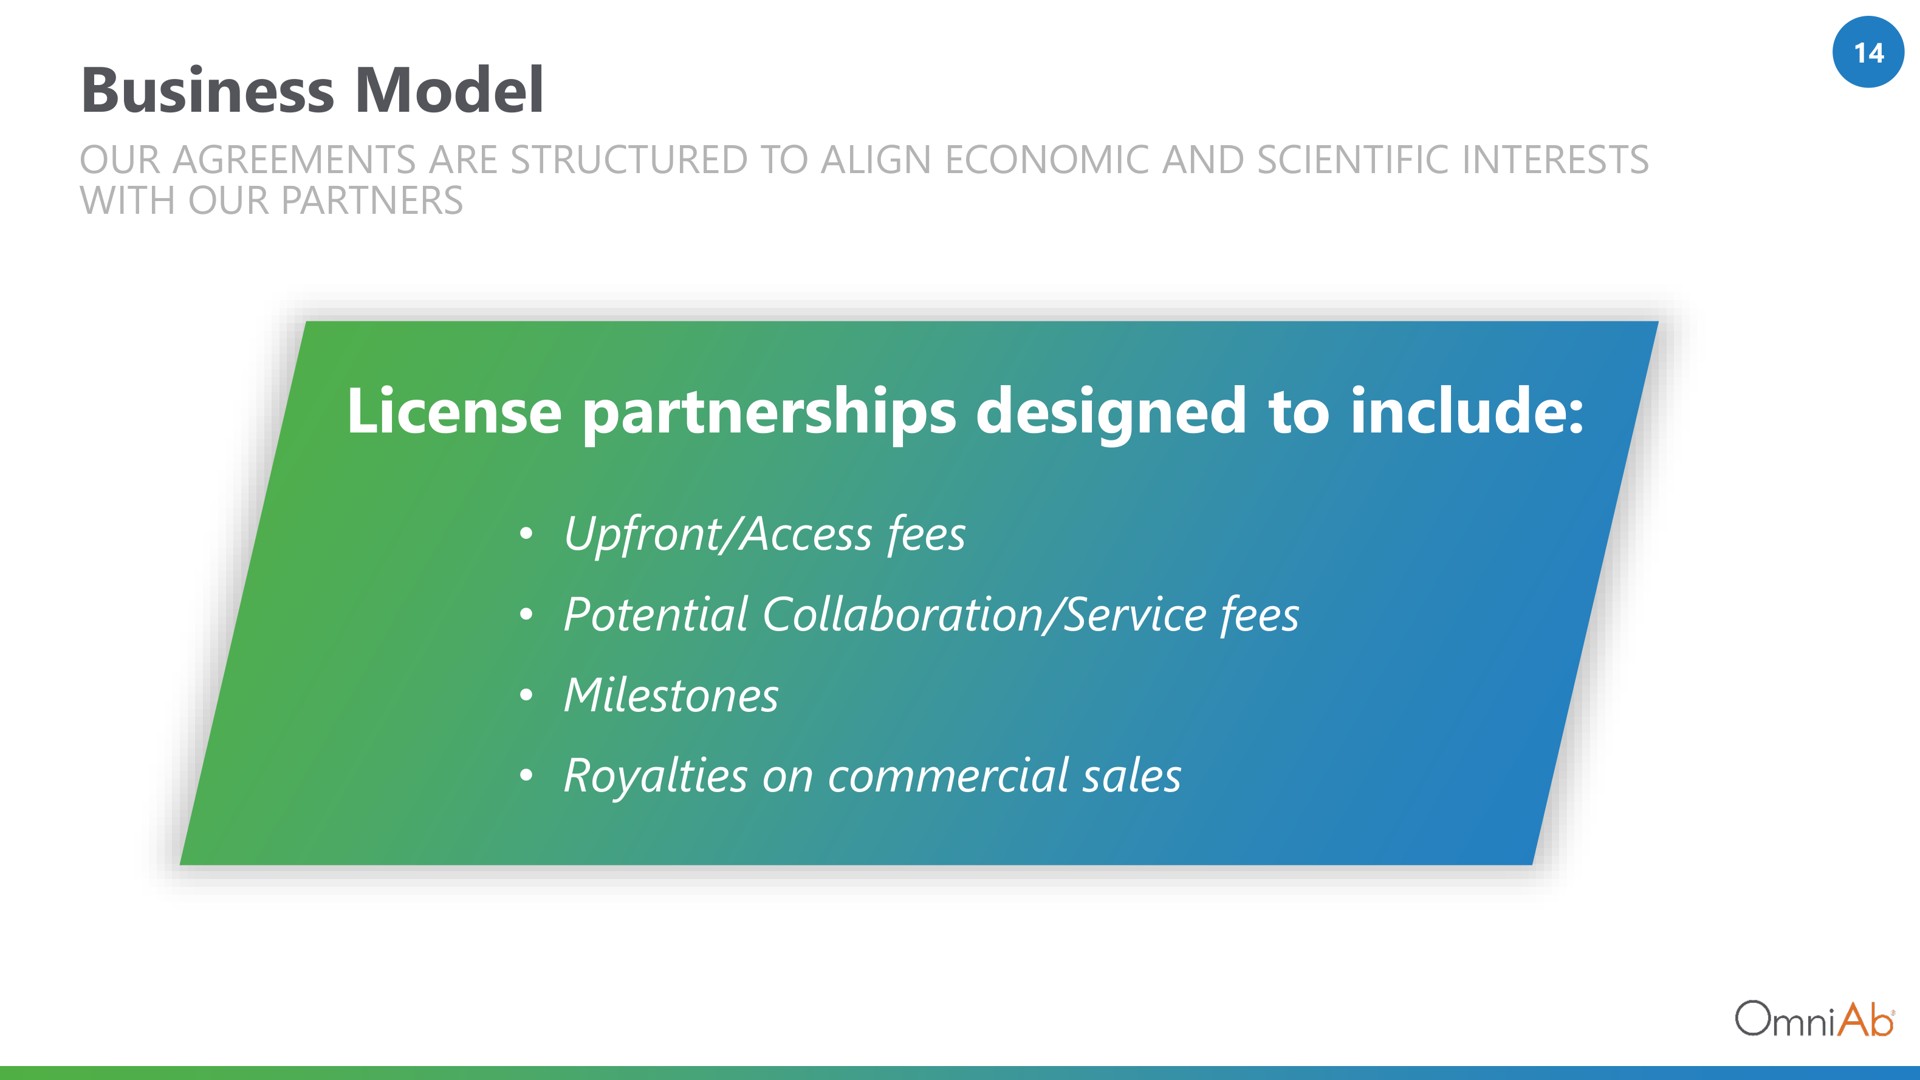 business model license partnerships designed to include access fees potential collaboration service fees milestones royalties on commercial sales | OmniAb